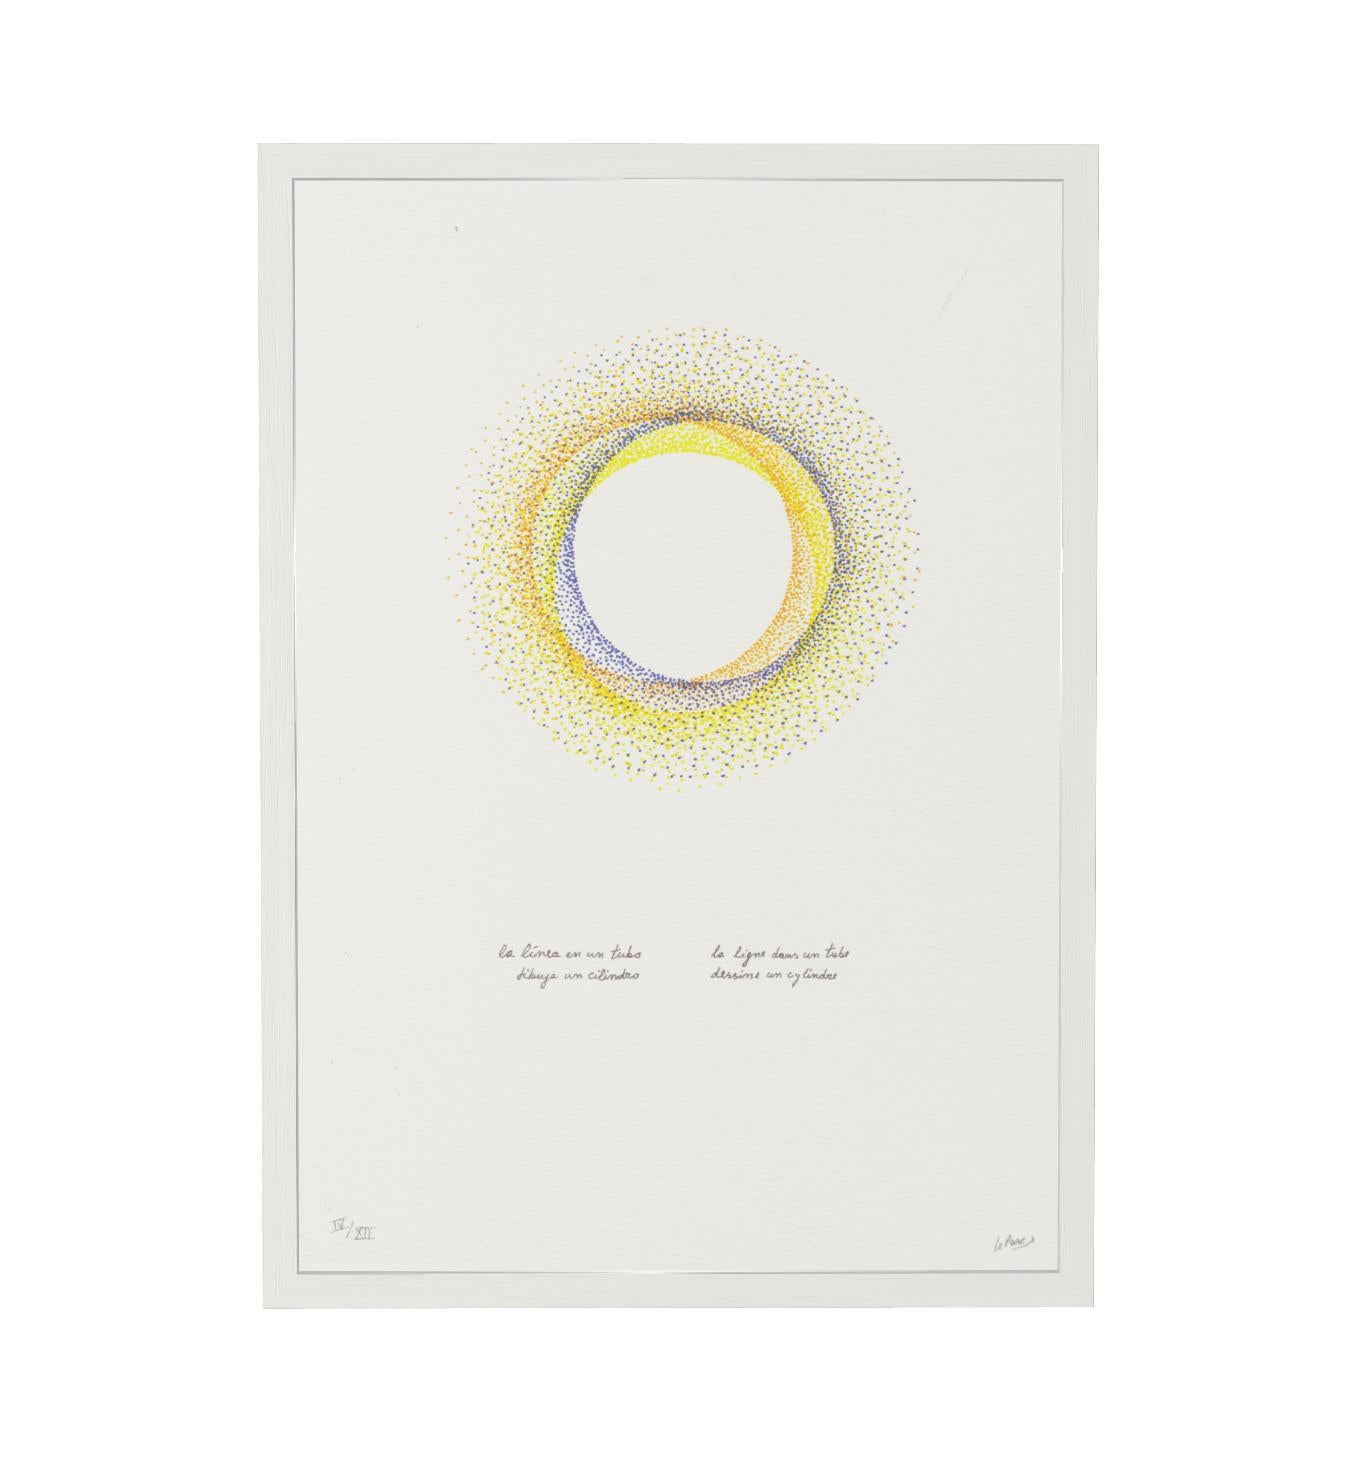 ALCHIMIE & POESIE 5 - White Abstract Print by Julio Le Parc